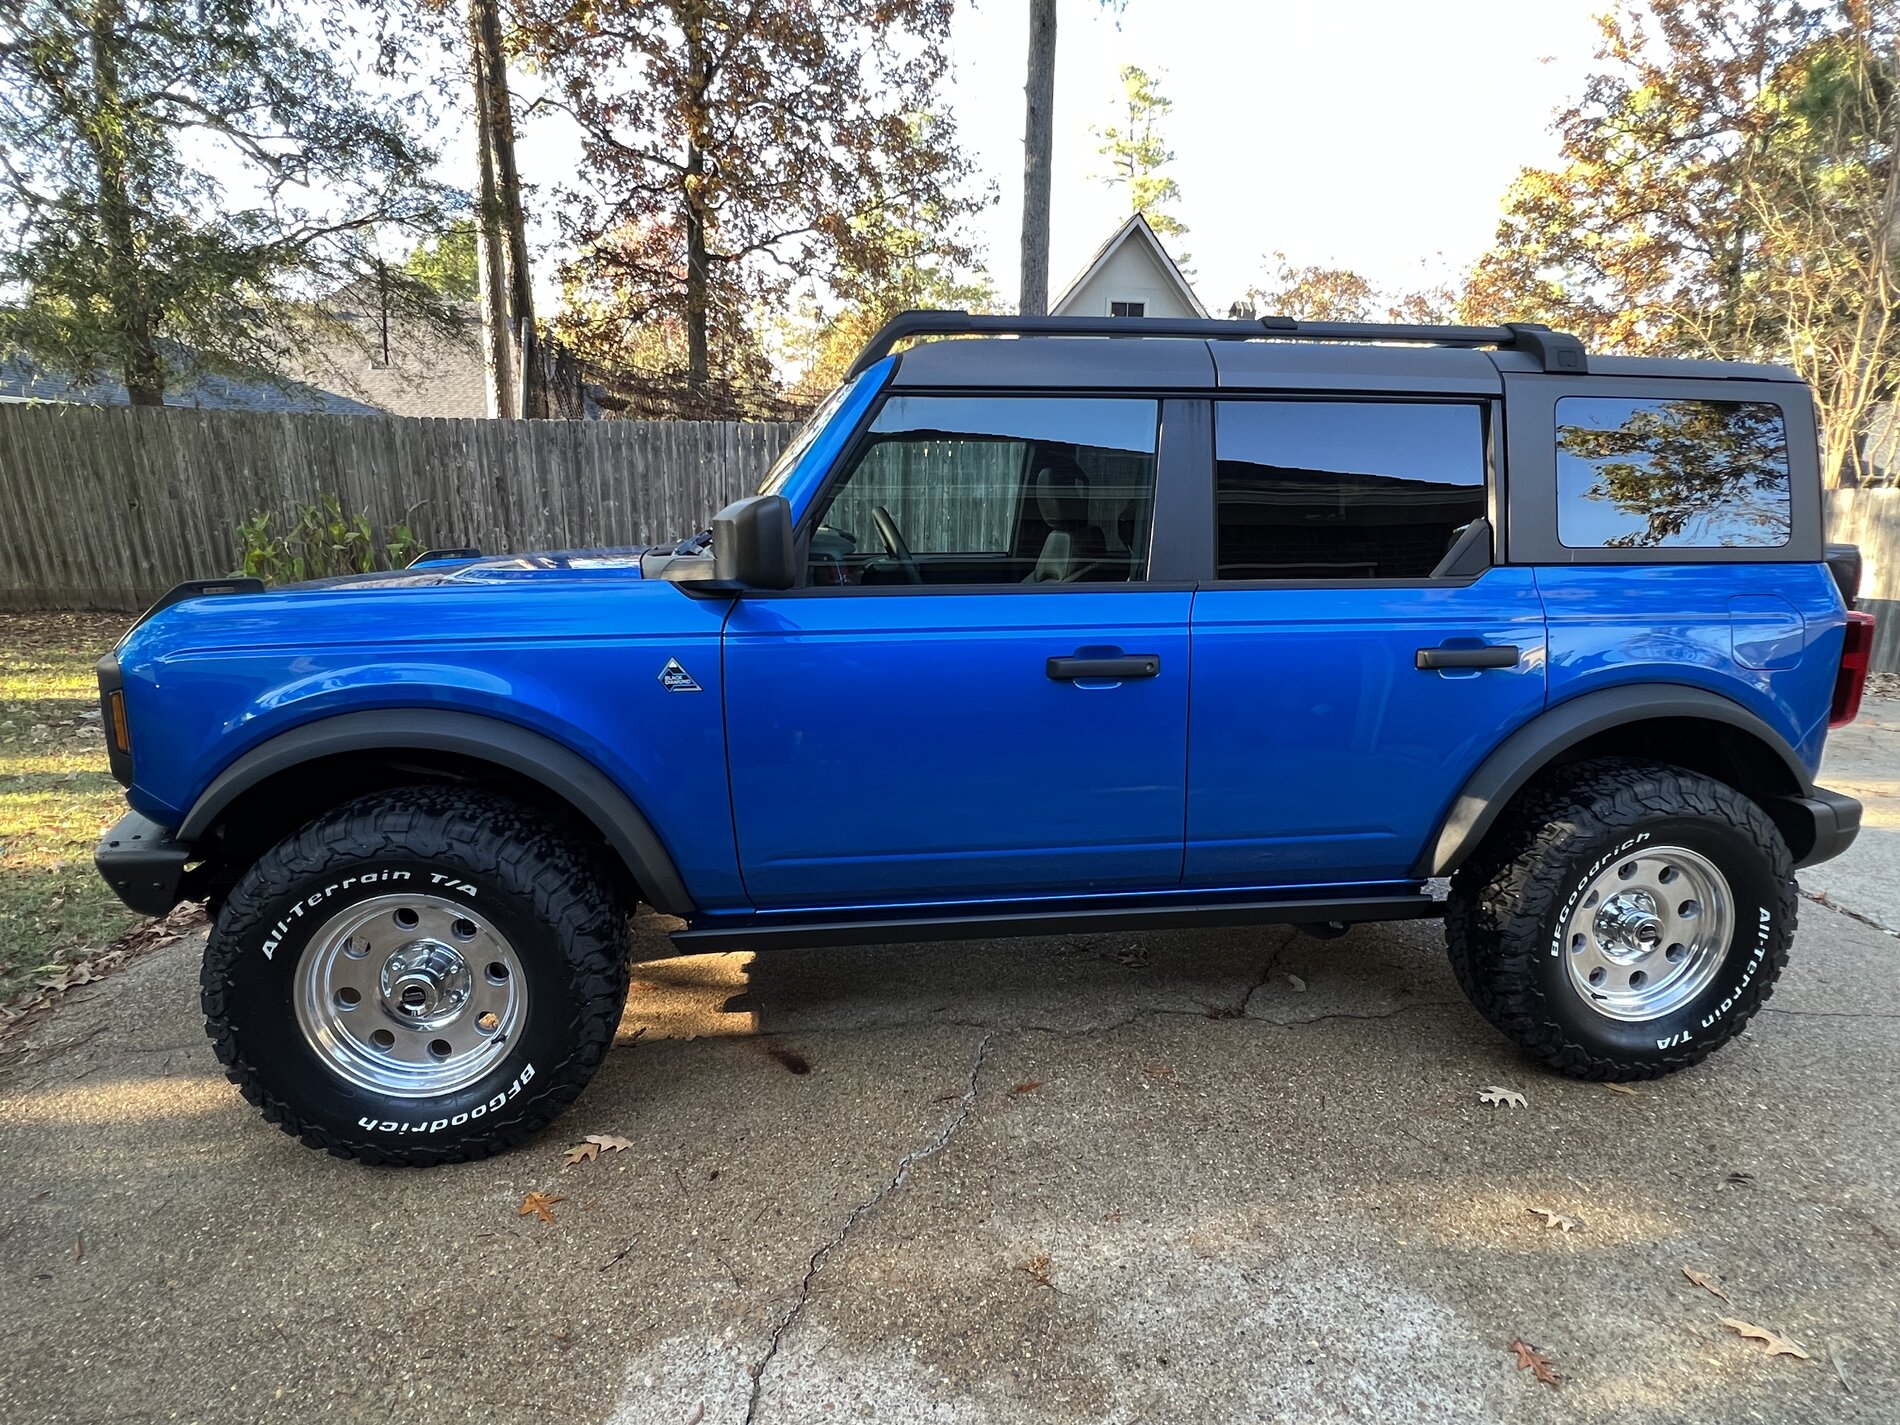 Ford Bronco Outer Banks - Looking for 33" Tires A9FF1F5F-0412-4028-AF23-C58EB0CD7540